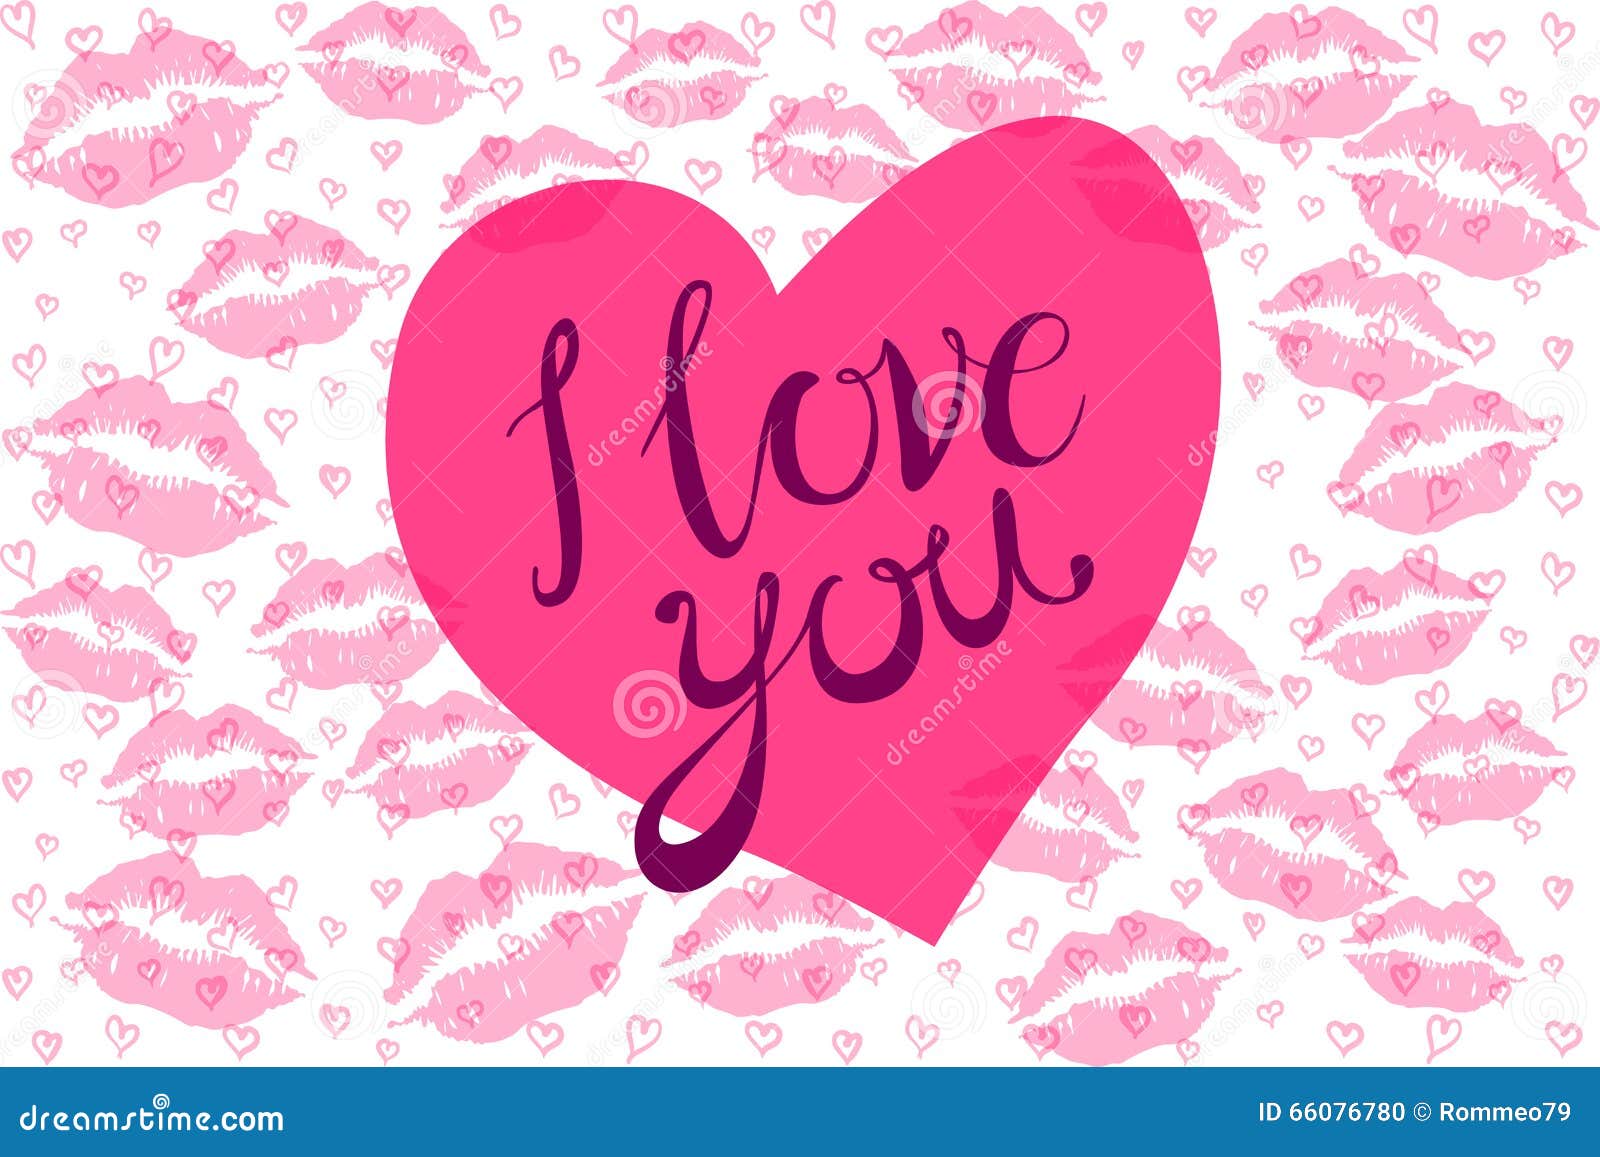 I Love You Kiss Red Lips Heart Vector Pink Stock Vector ...